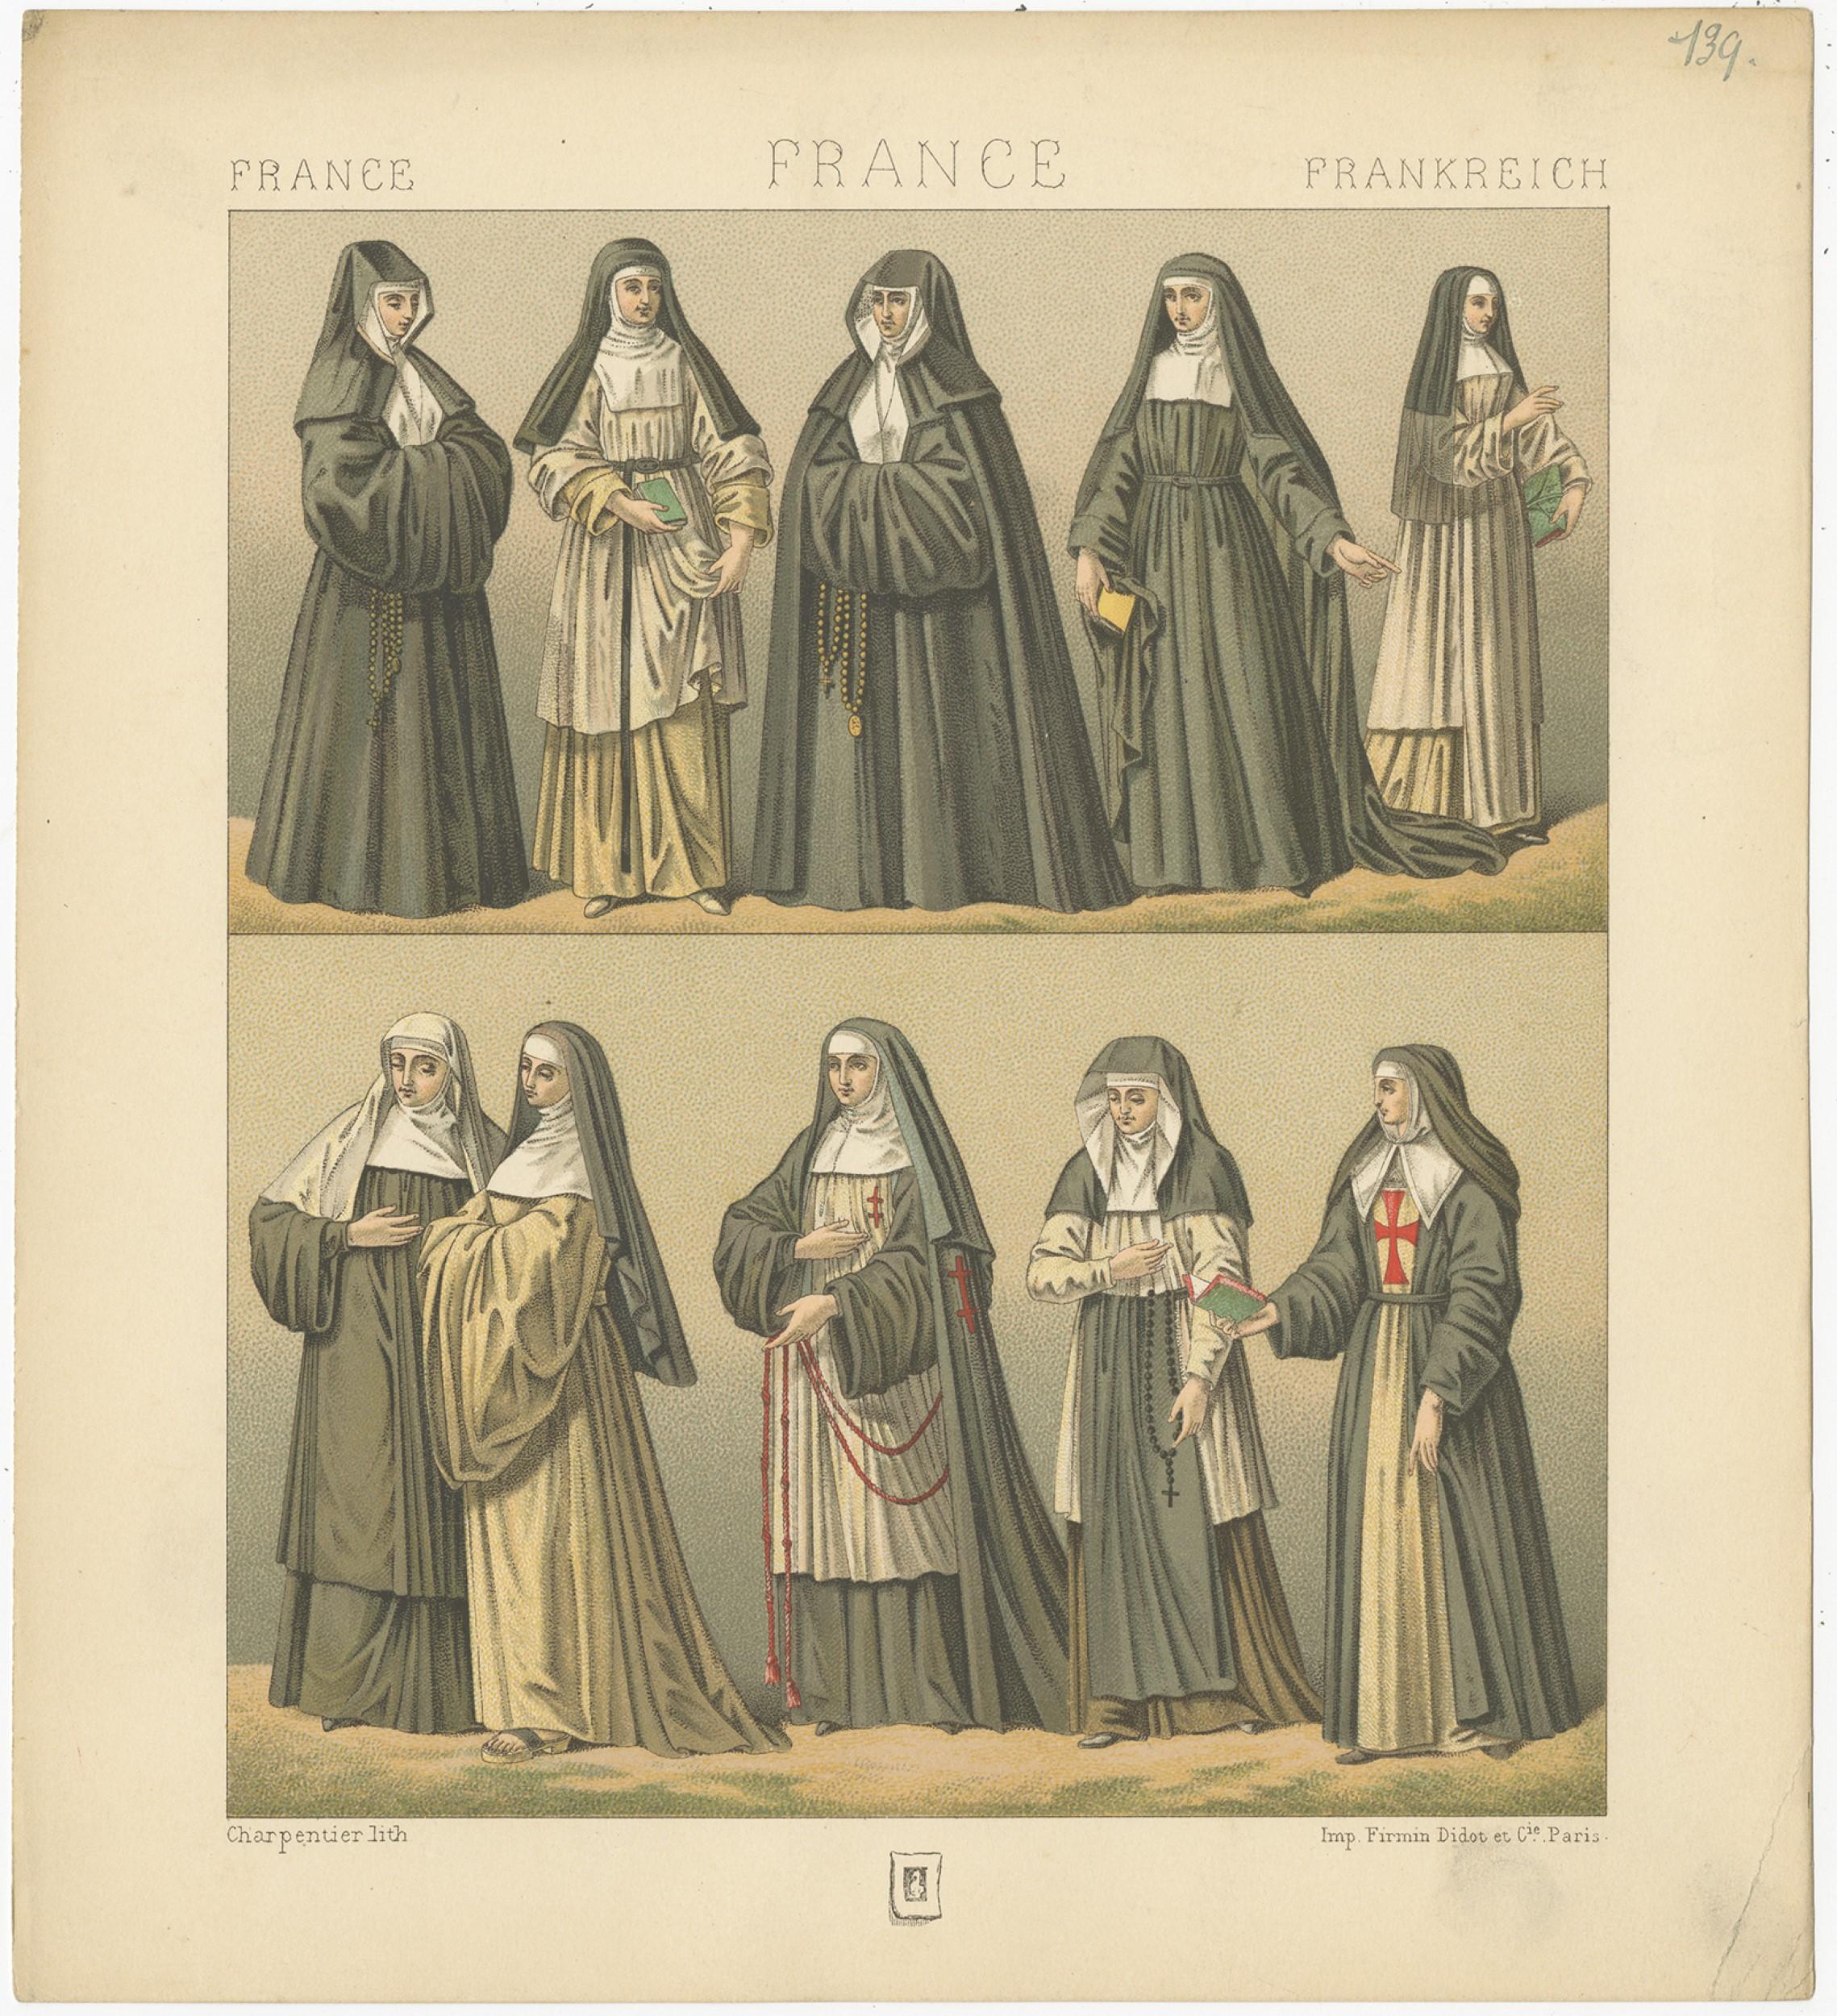 Antique print titled 'France - France - Frankreich'. Chromolithograph of French Nuns. This print originates from 'Le Costume Historique' by M.A. Racinet. Published, circa 1880.
 
   